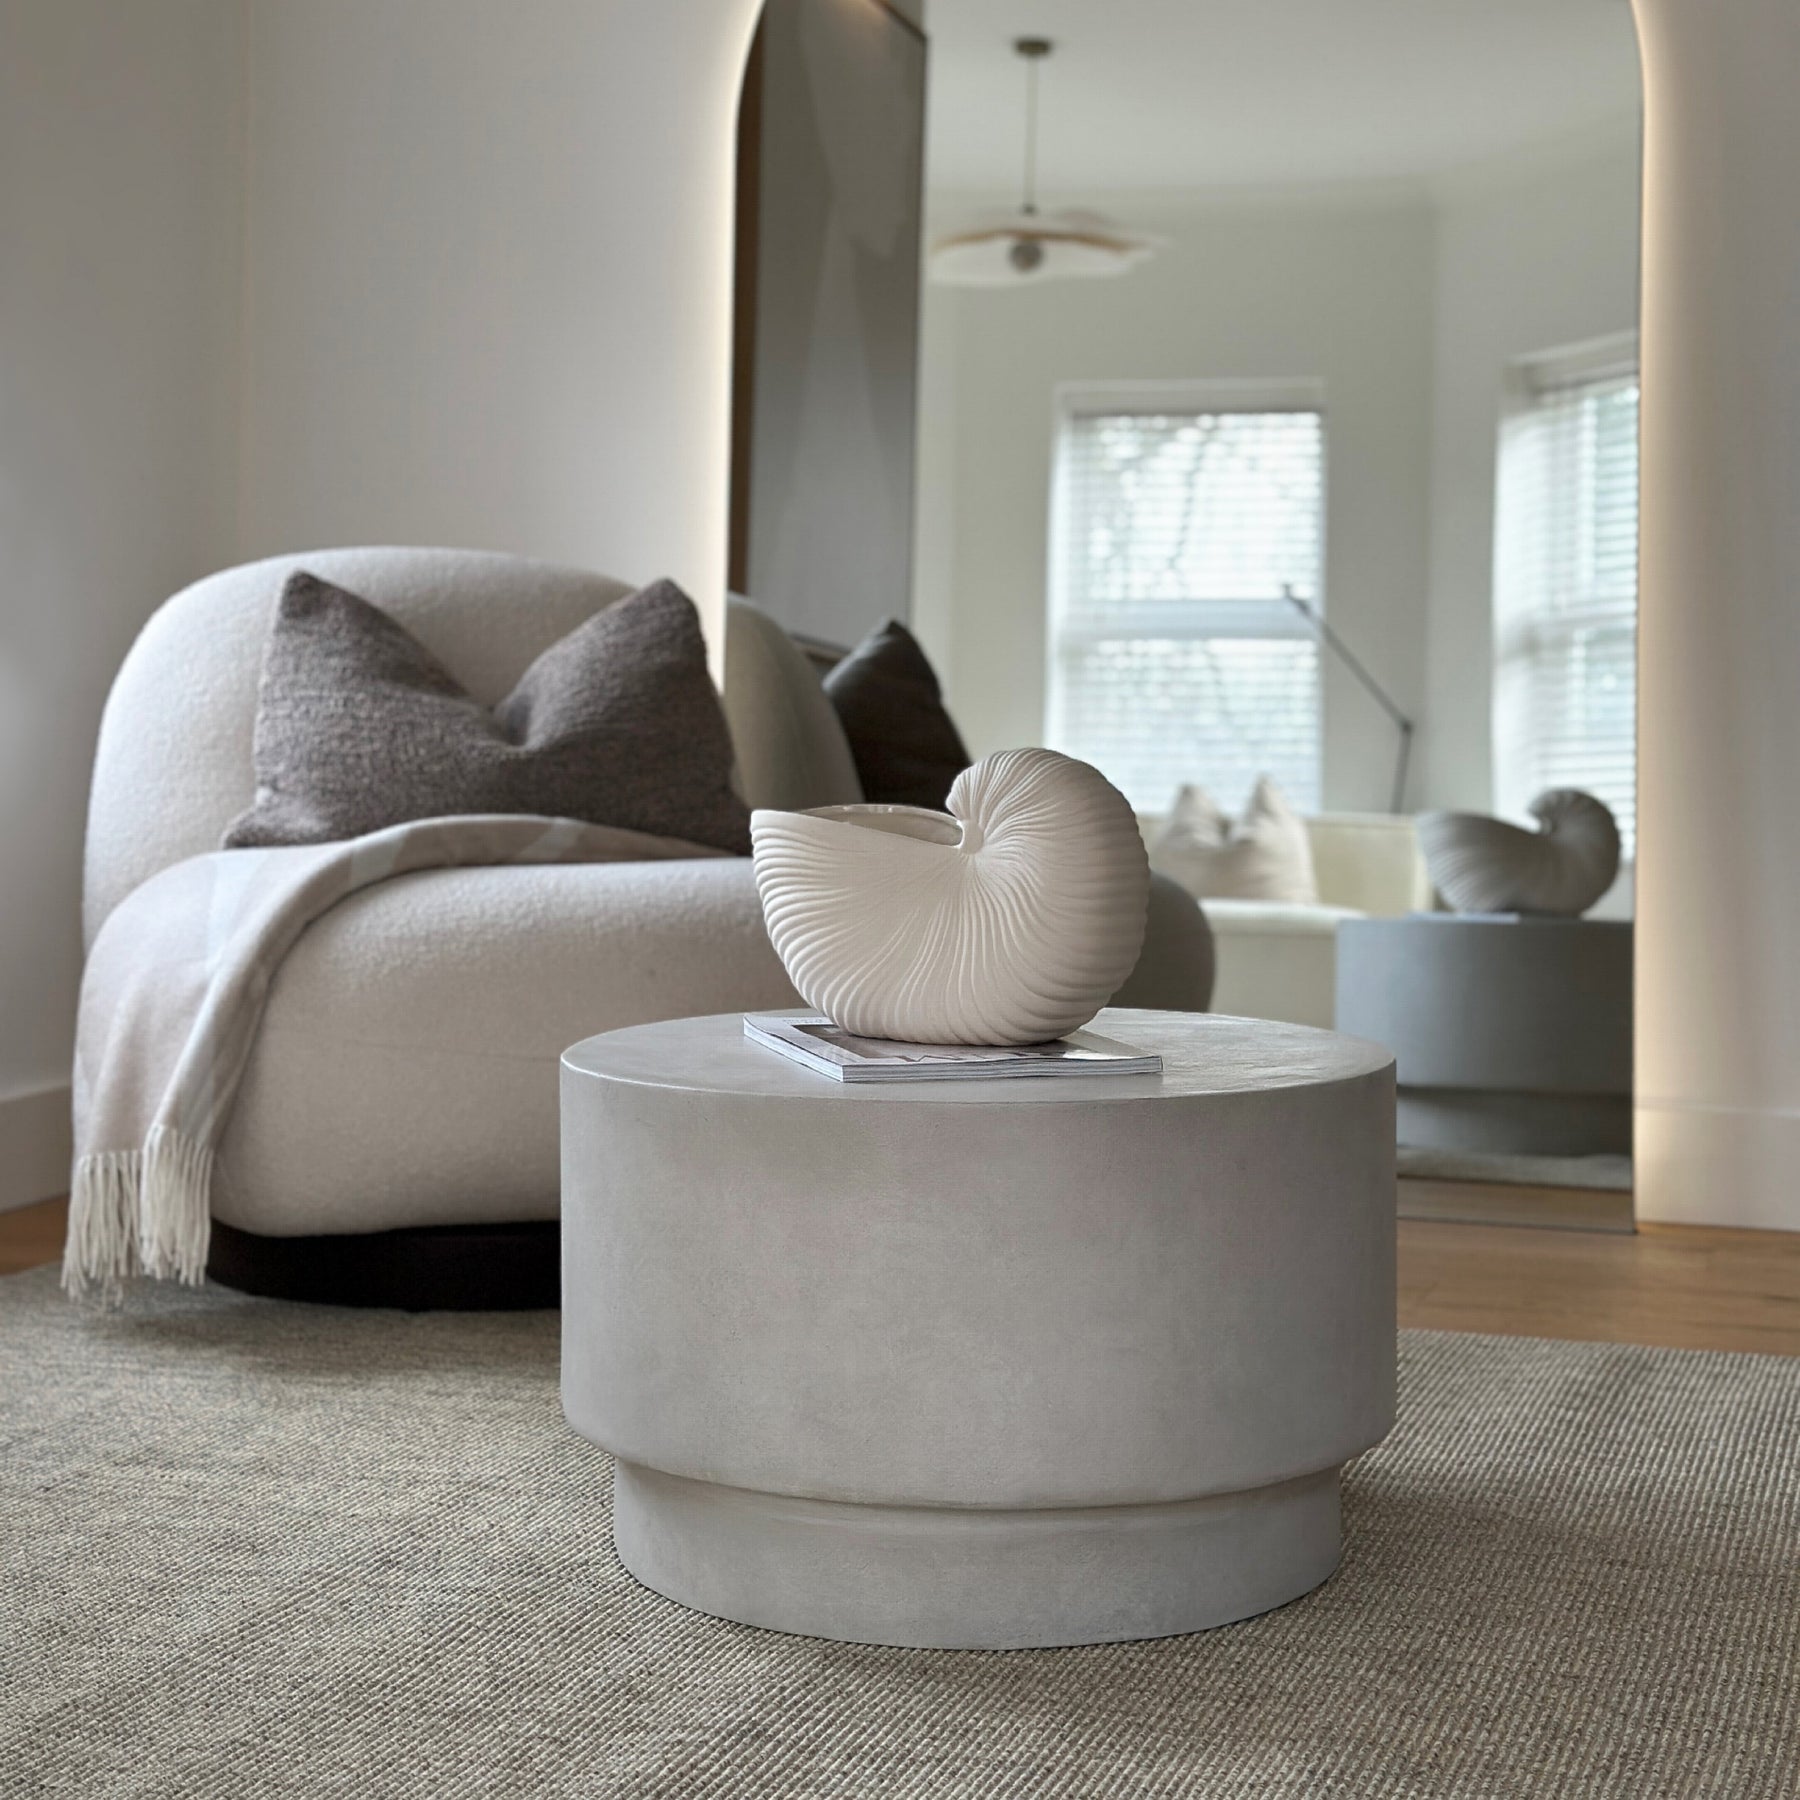 Minimalist concrete round coffee table displayed in living room